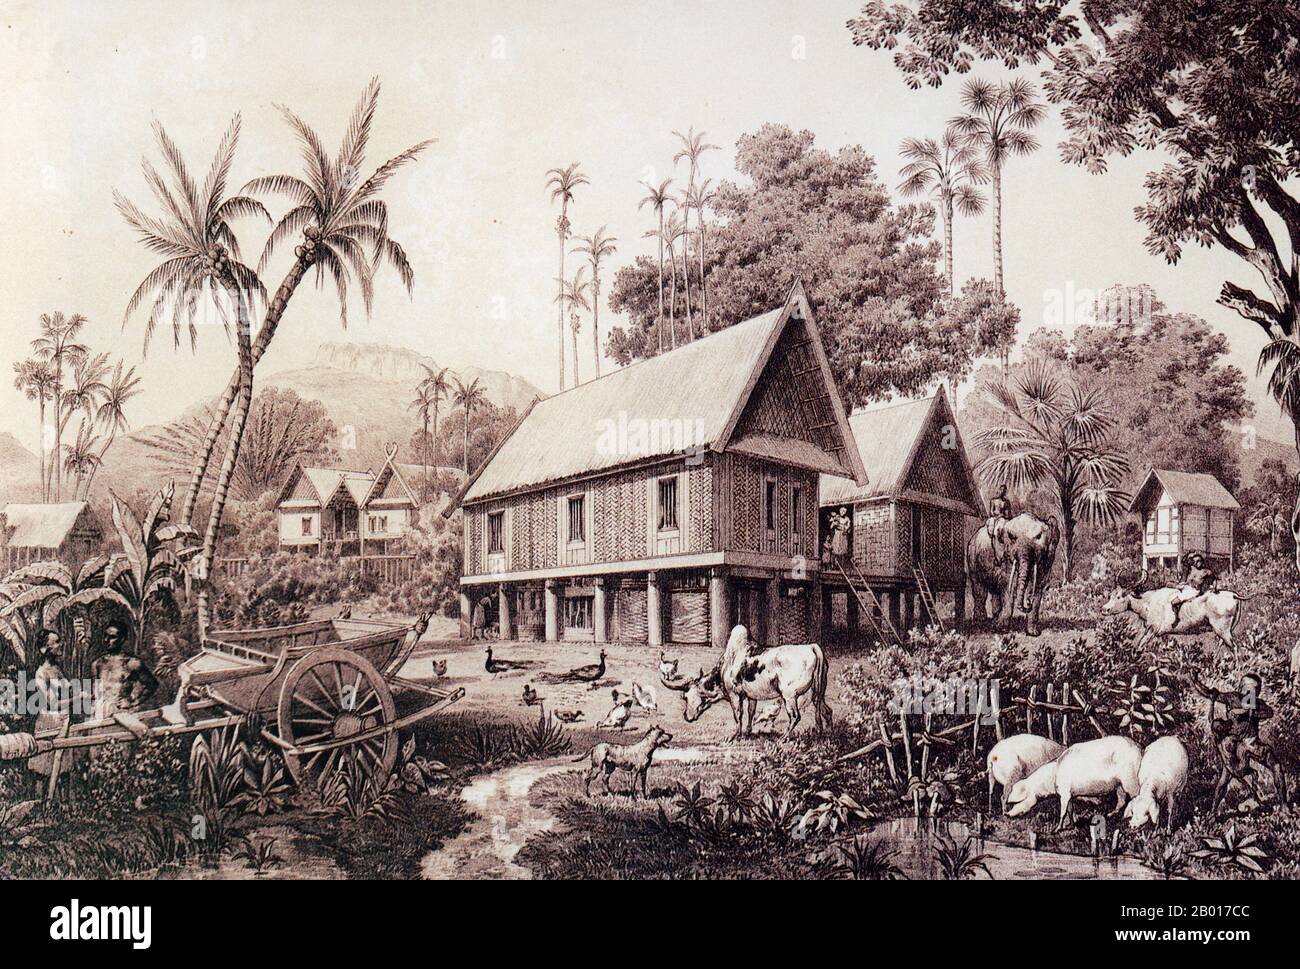 Laos: 'The House of a Wealthy Laotian Family'. Engraving by Louis Delaporte (1842-1925), c. 1866-1867.  The house is made of rattan and bamboo. It is supported by hardwood stilts to protect the building in Monsoon season. Under the house is a chicken run and pig sty. Peacocks roam in the garden, and the hamlet is surrounded by coconut palms. Stock Photo